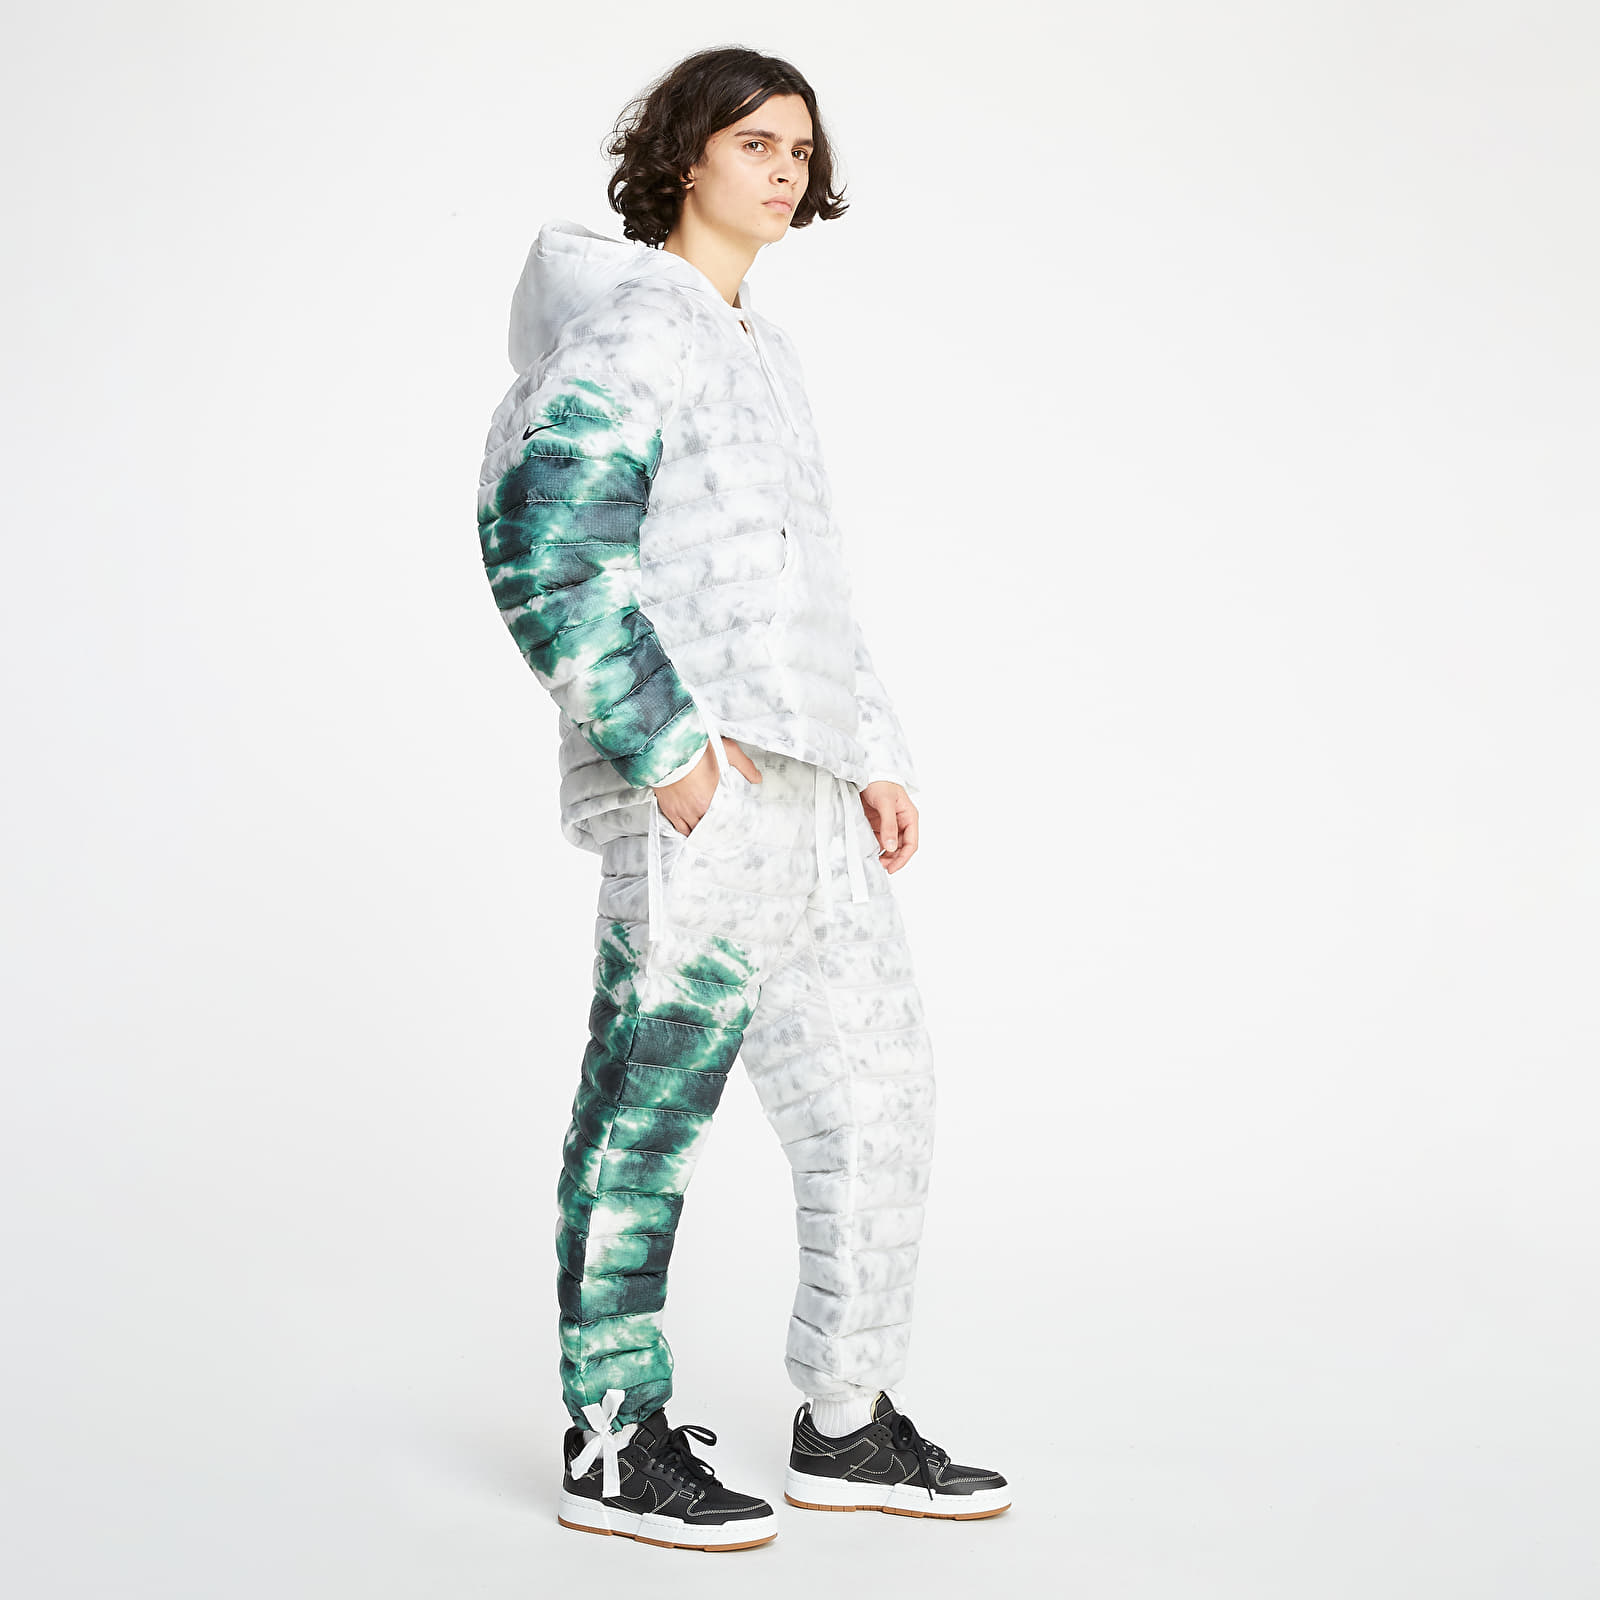 Buy Nike x Stussy Insulated Pant 'White/Gorge Green' - DC1092 100